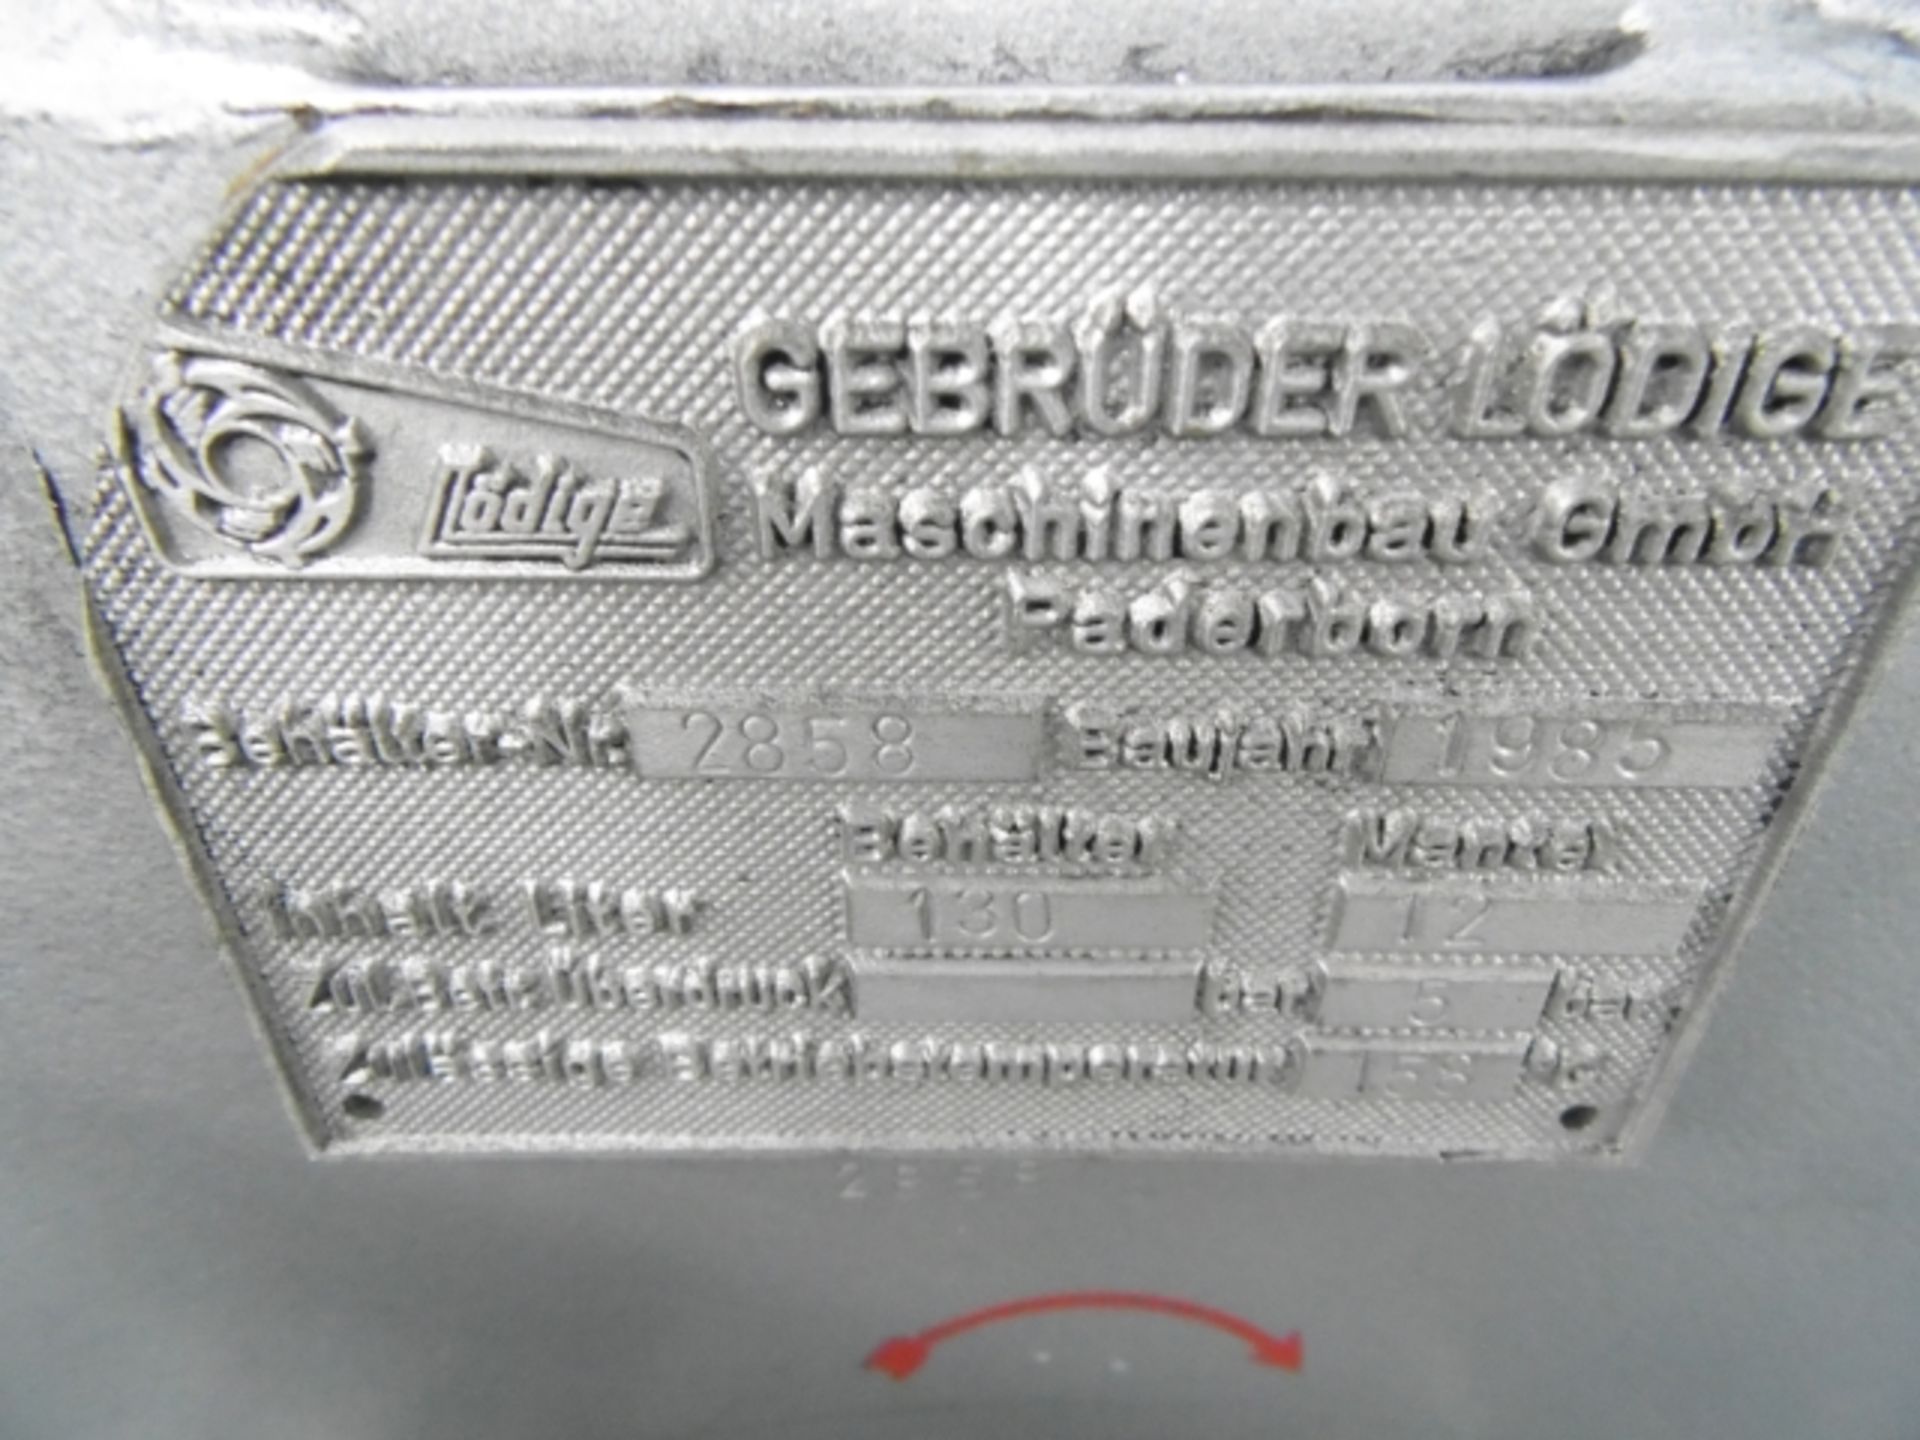 * Gebruder Lodige/Winkworth Type FM130D Ball Mill/Mixer; Year of Manufacture 1985; 3 Phase; - Image 8 of 8